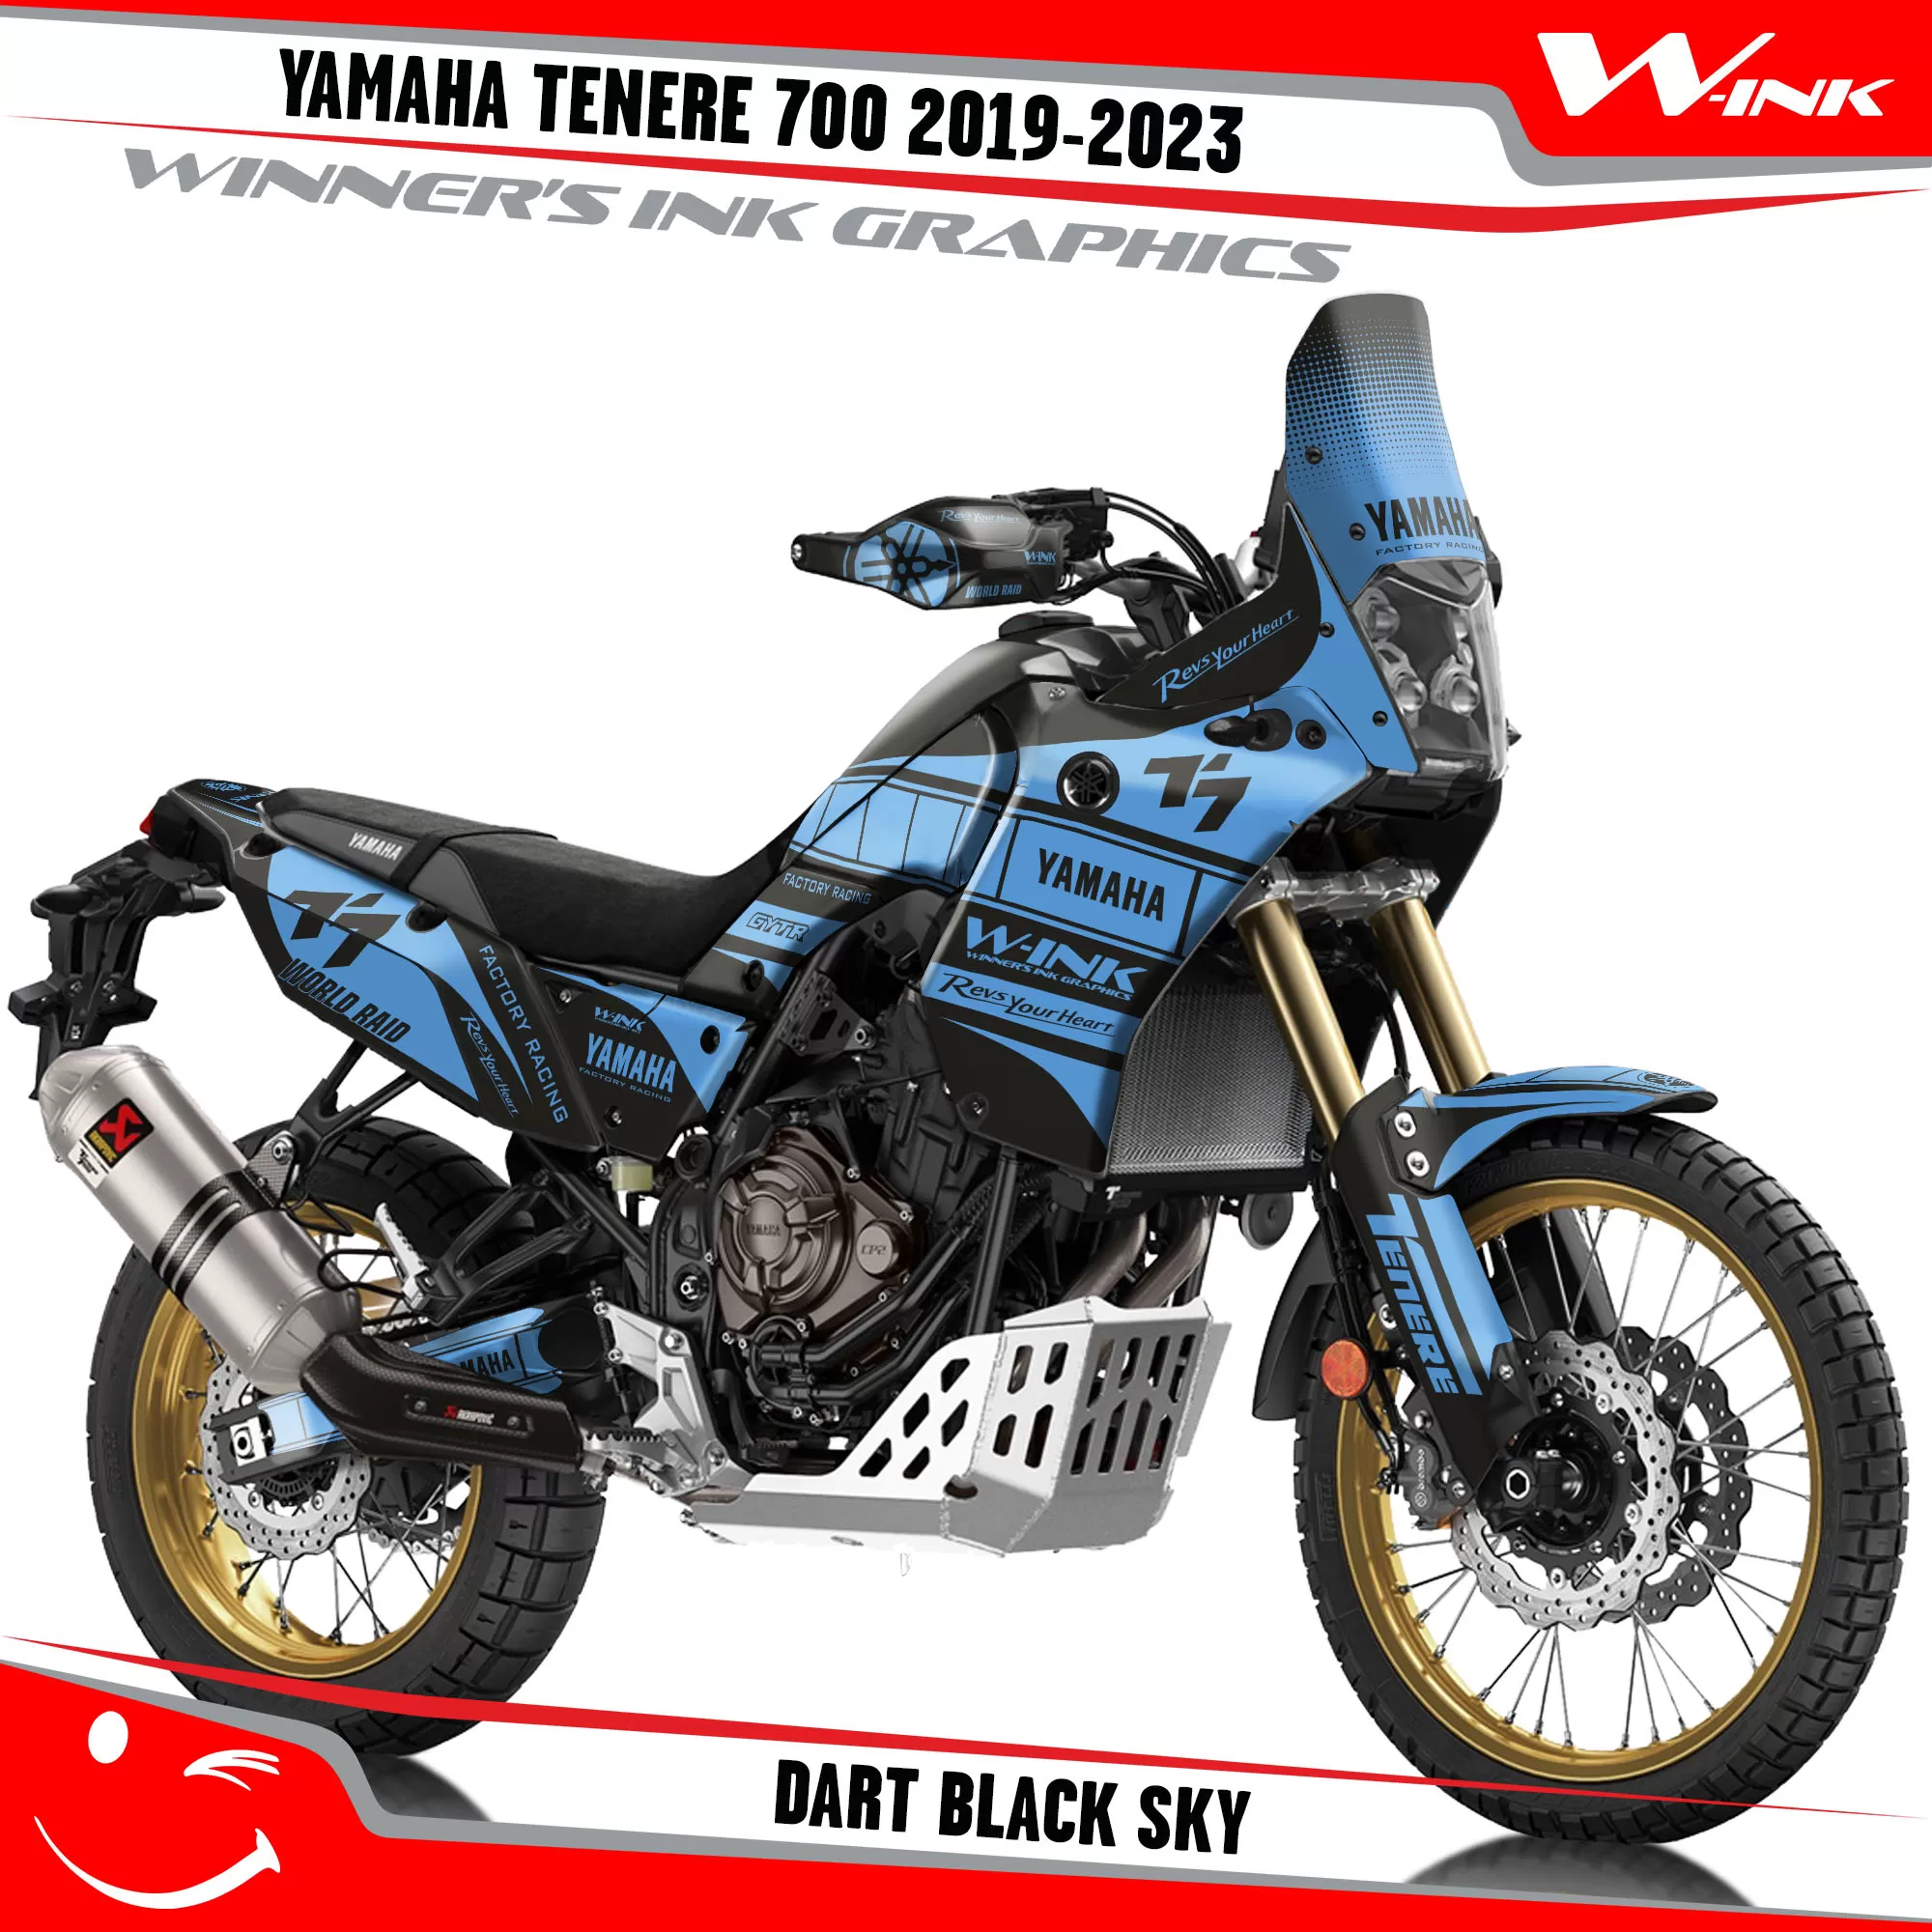 Yamaha-Tenere-700-2019-2020-2021-2022-2023-graphics-kit-and-decals-with-desing-Dart-Full-Black-Sky